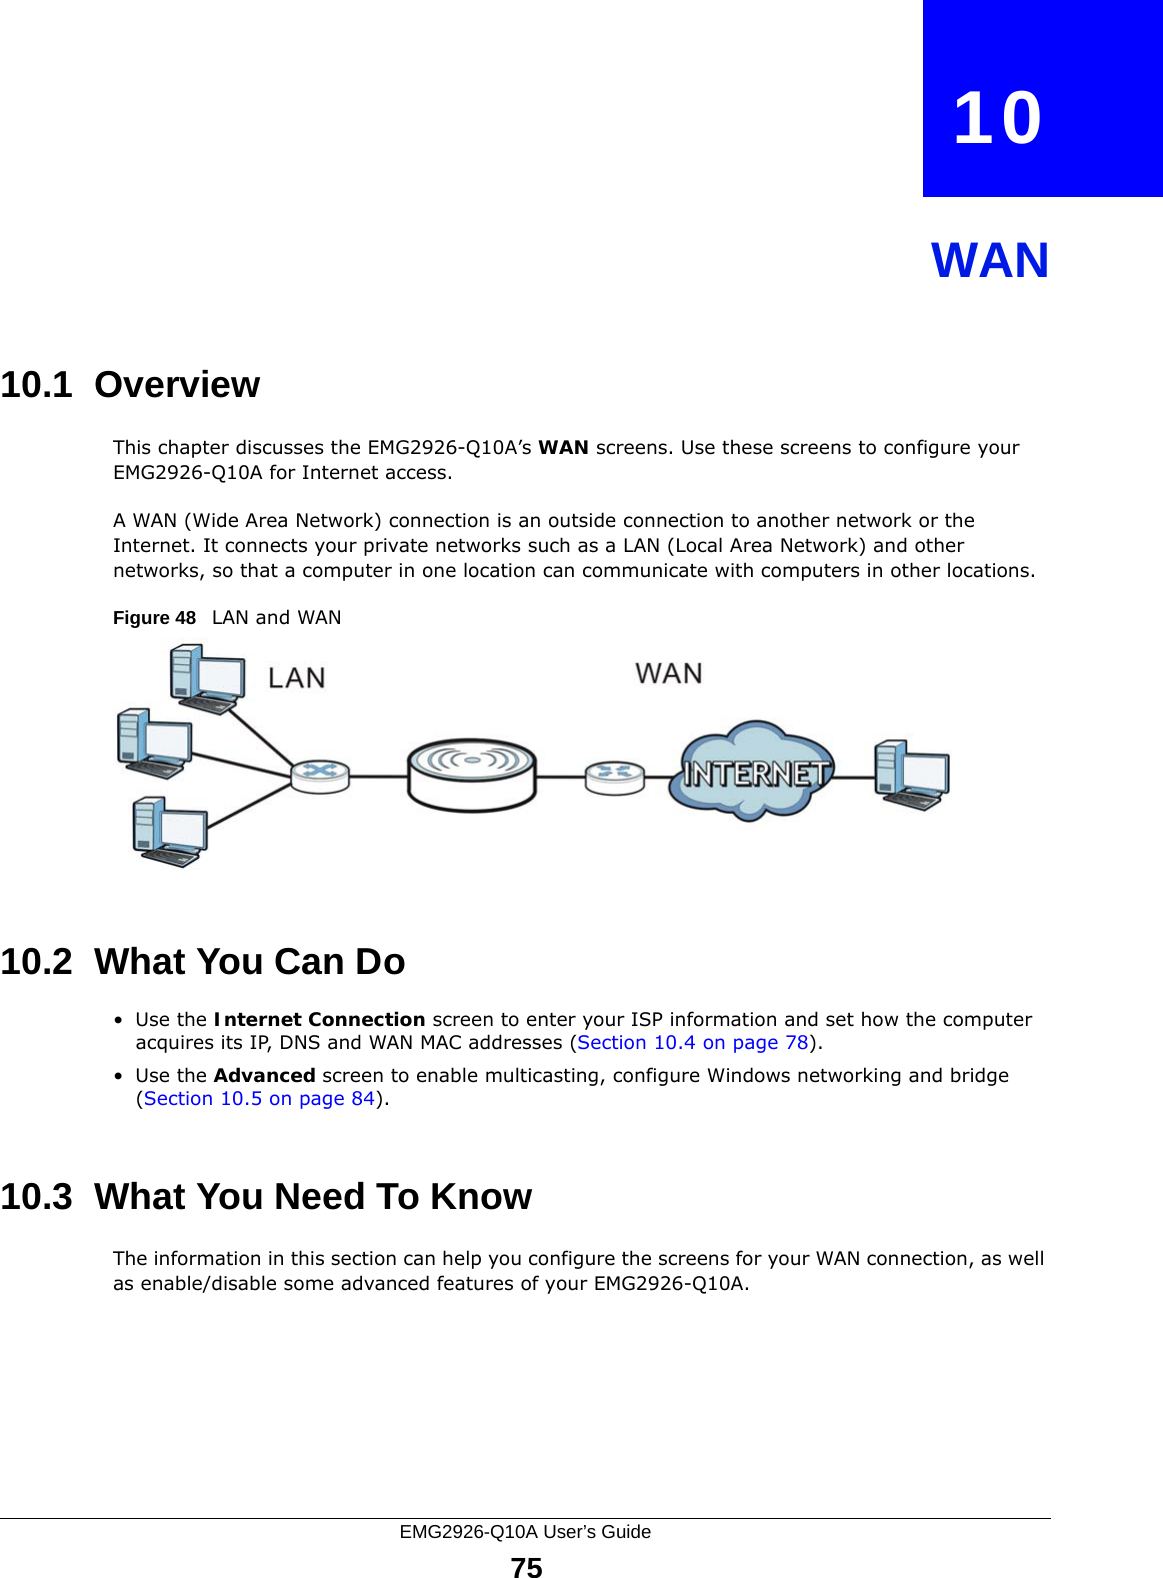 EMG2926-Q10A User’s Guide75CHAPTER   10WAN10.1  OverviewThis chapter discusses the EMG2926-Q10A’s WAN screens. Use these screens to configure your EMG2926-Q10A for Internet access.A WAN (Wide Area Network) connection is an outside connection to another network or the Internet. It connects your private networks such as a LAN (Local Area Network) and other networks, so that a computer in one location can communicate with computers in other locations.Figure 48   LAN and WAN10.2  What You Can Do•Use the Internet Connection screen to enter your ISP information and set how the computer acquires its IP, DNS and WAN MAC addresses (Section 10.4 on page 78).•Use the Advanced screen to enable multicasting, configure Windows networking and bridge (Section 10.5 on page 84).10.3  What You Need To KnowThe information in this section can help you configure the screens for your WAN connection, as well as enable/disable some advanced features of your EMG2926-Q10A.